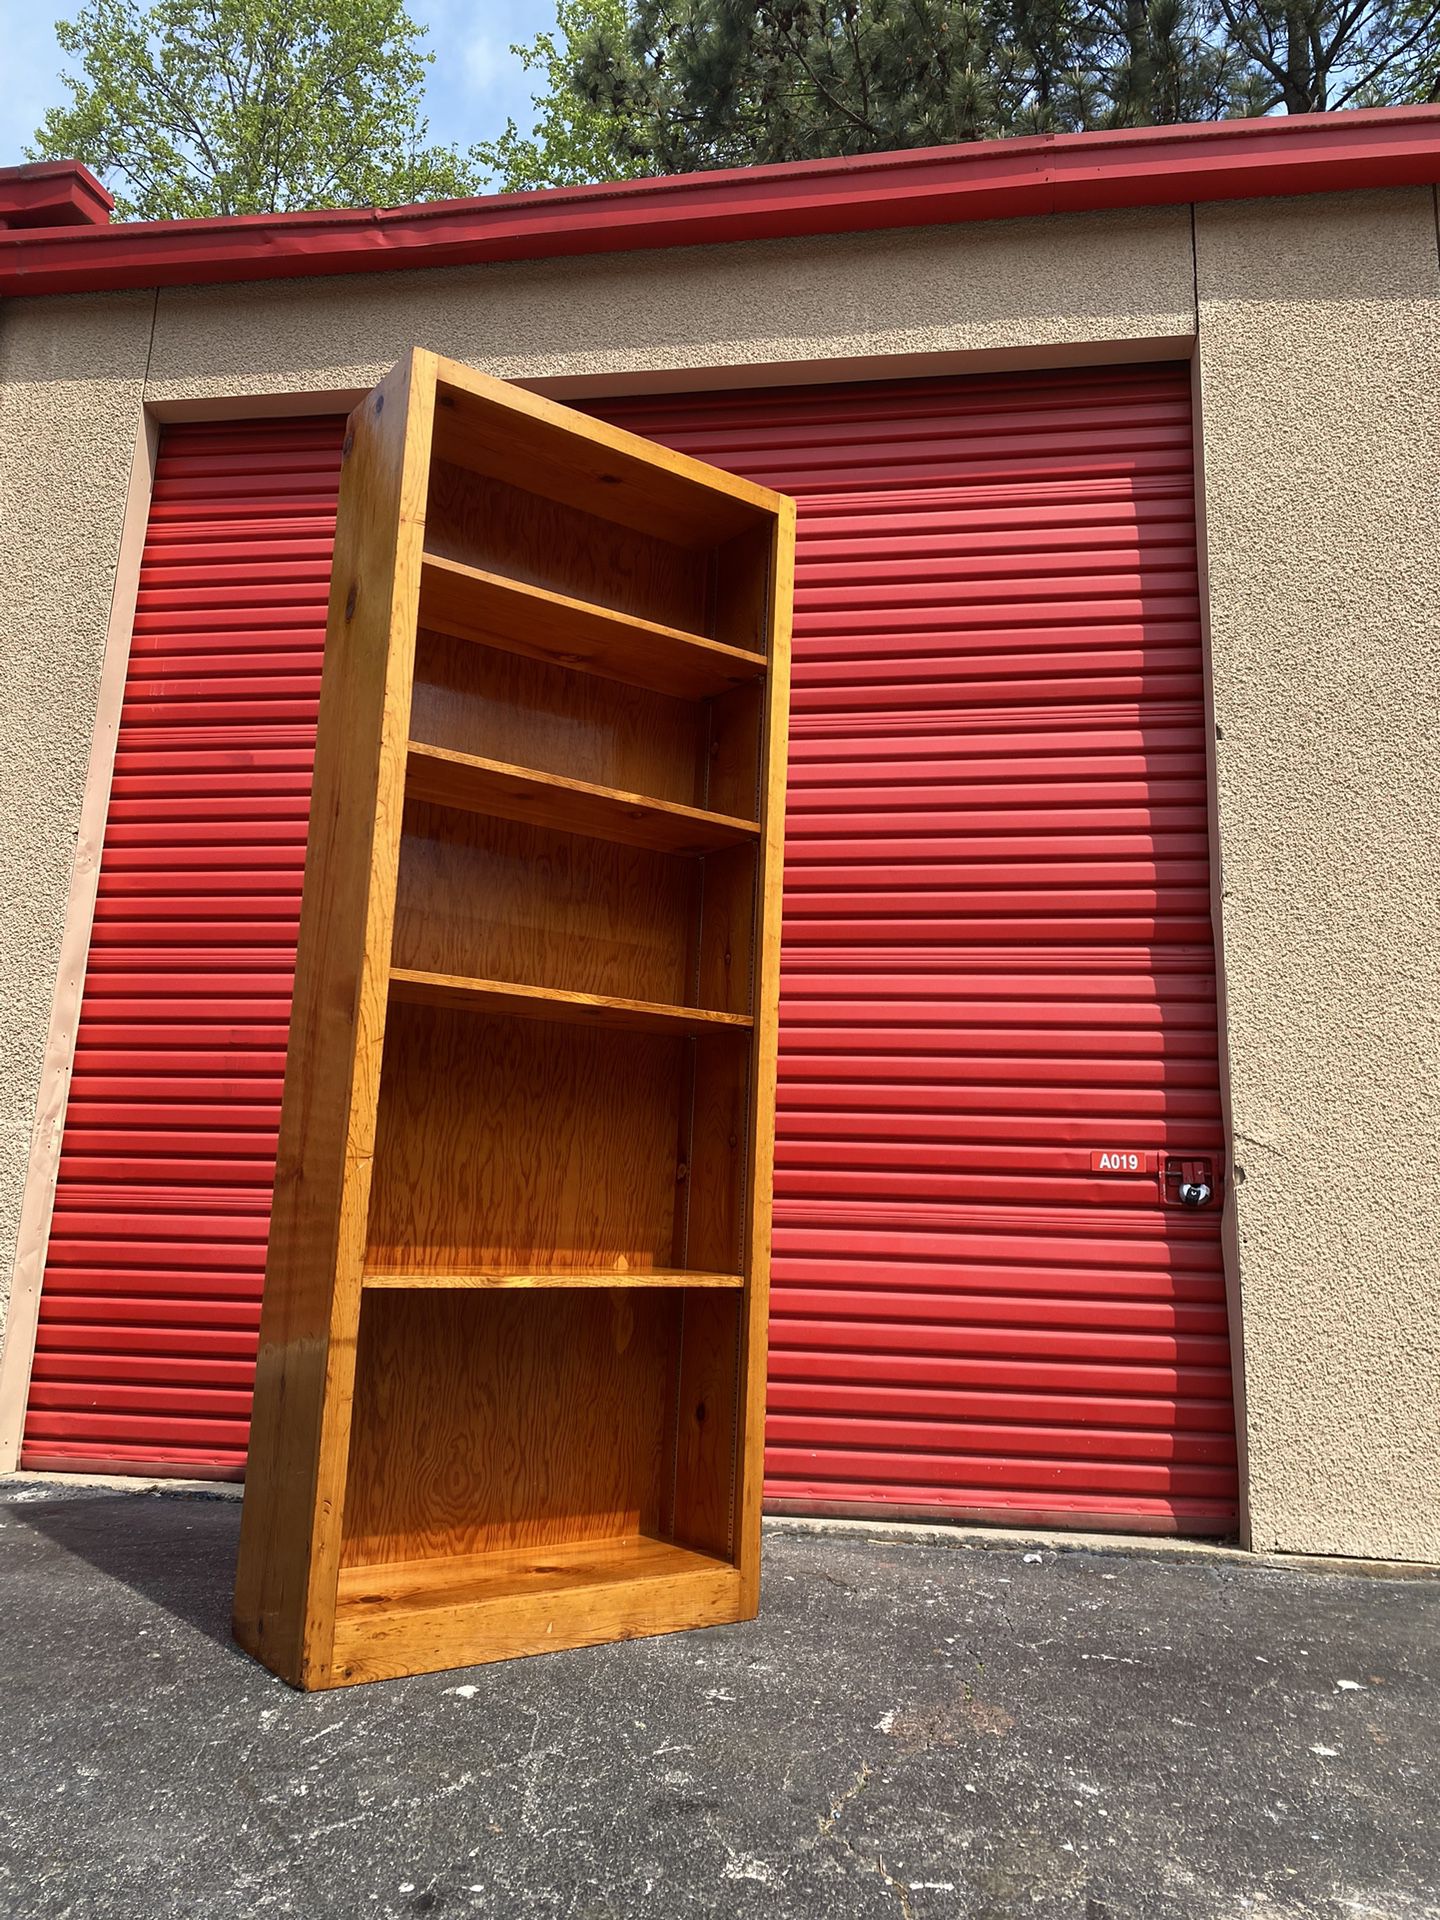 Bookcase Shelve Solid Wood 